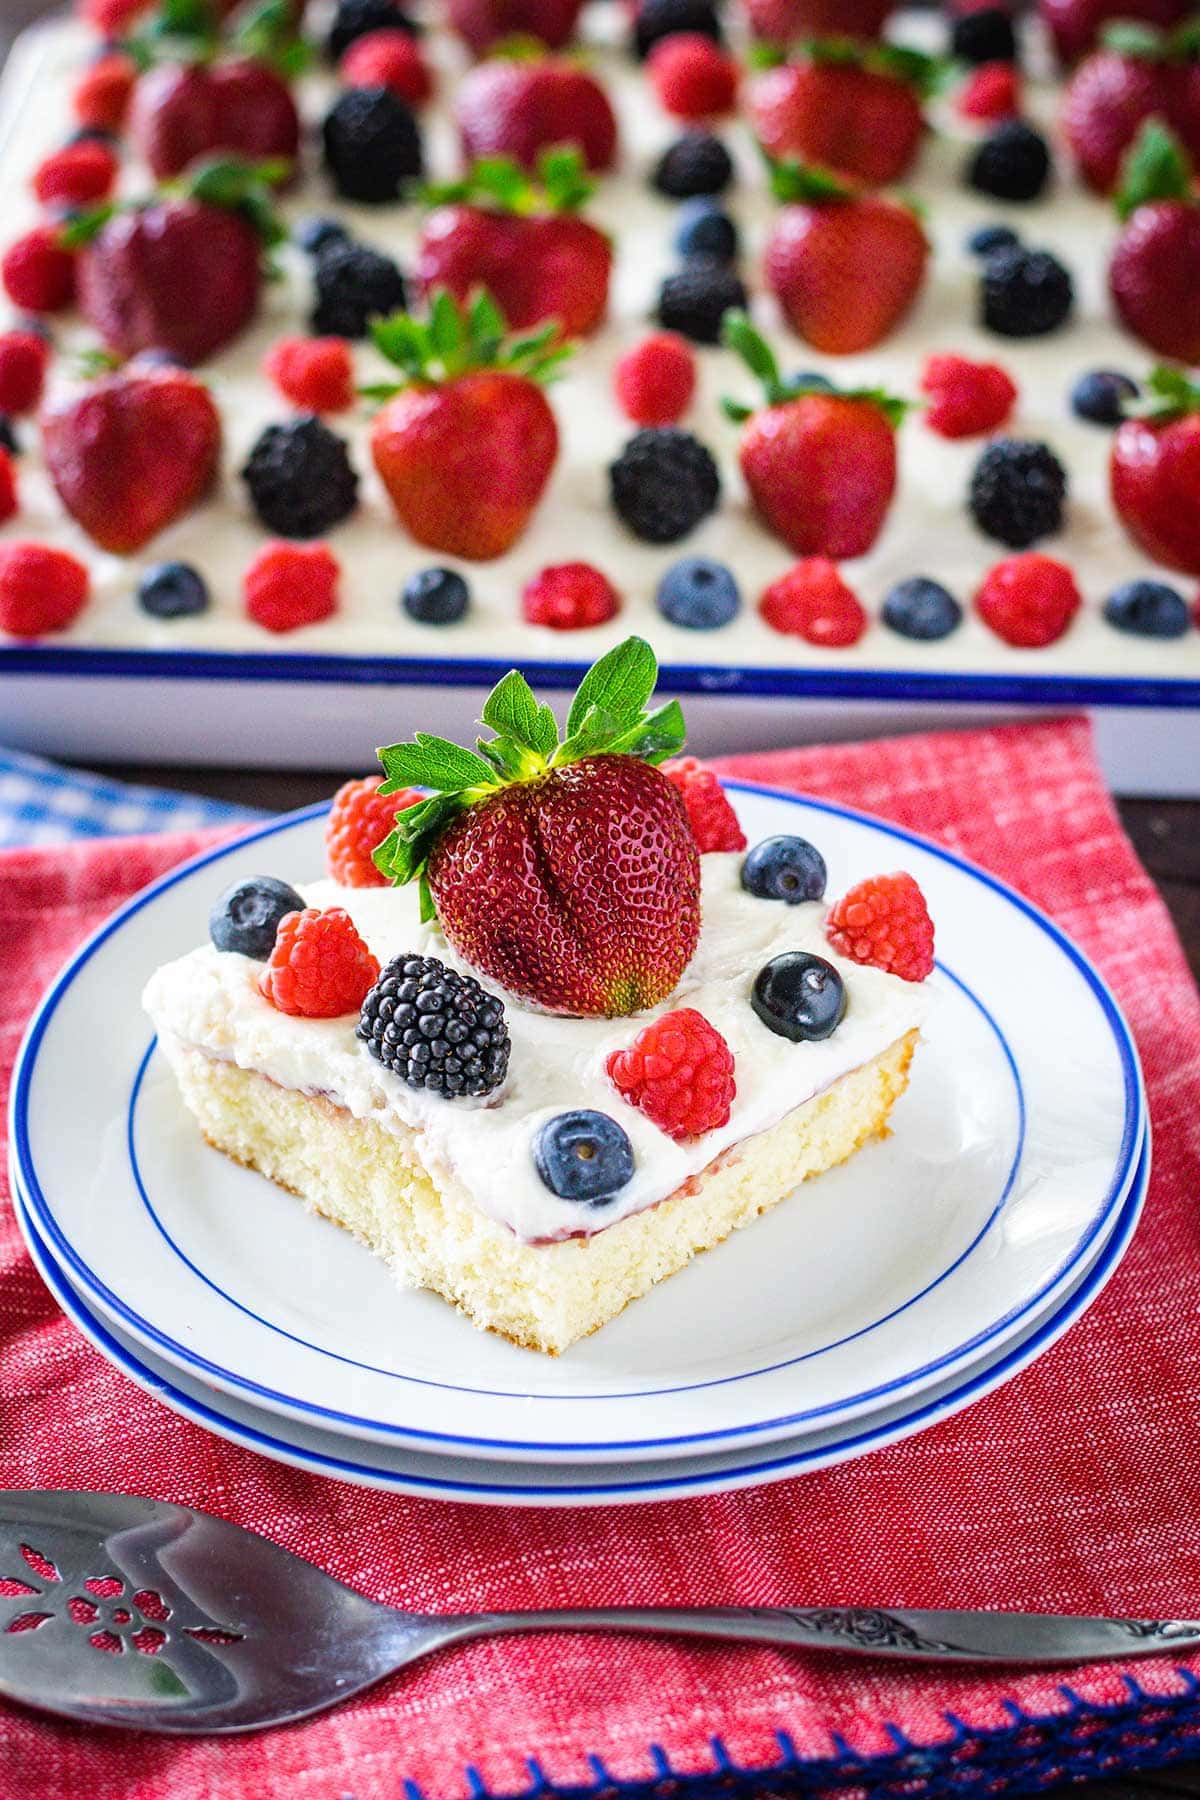 Simplified Berry Chantilly Cake Recipe - On Sutton Place